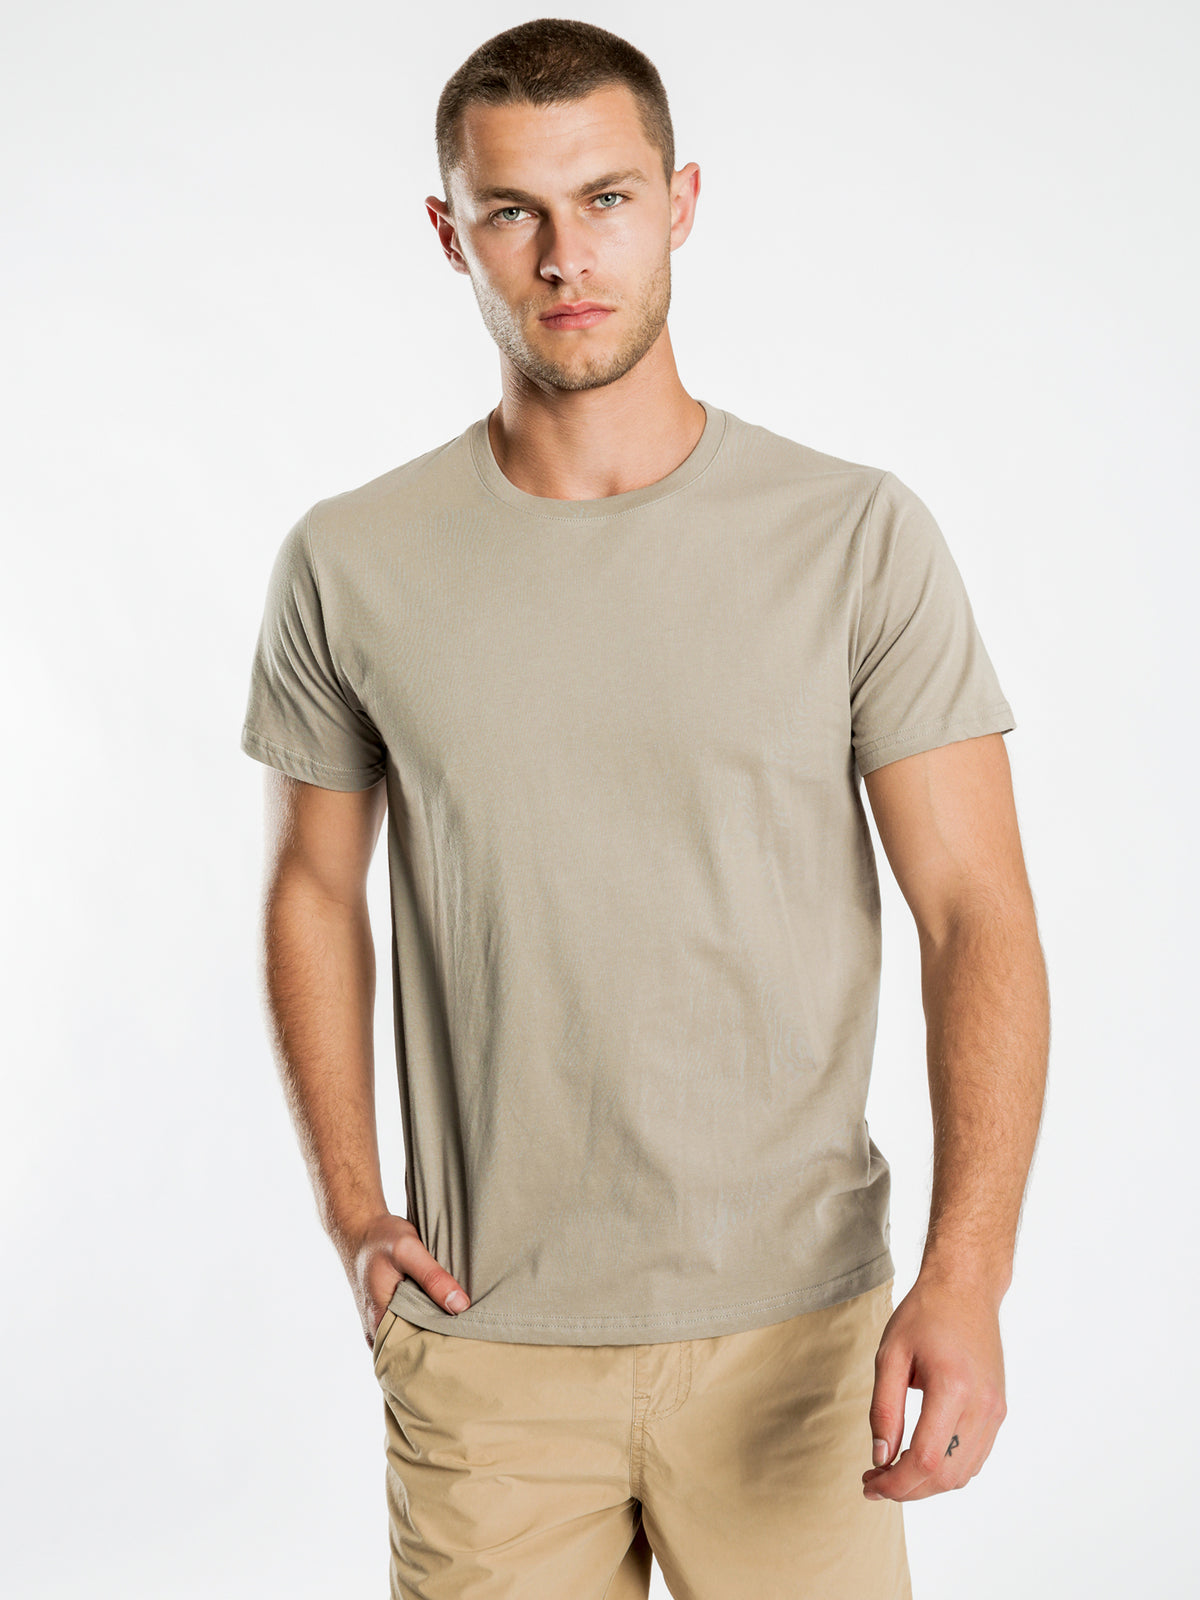 Plain Crew T-Shirt in Olive